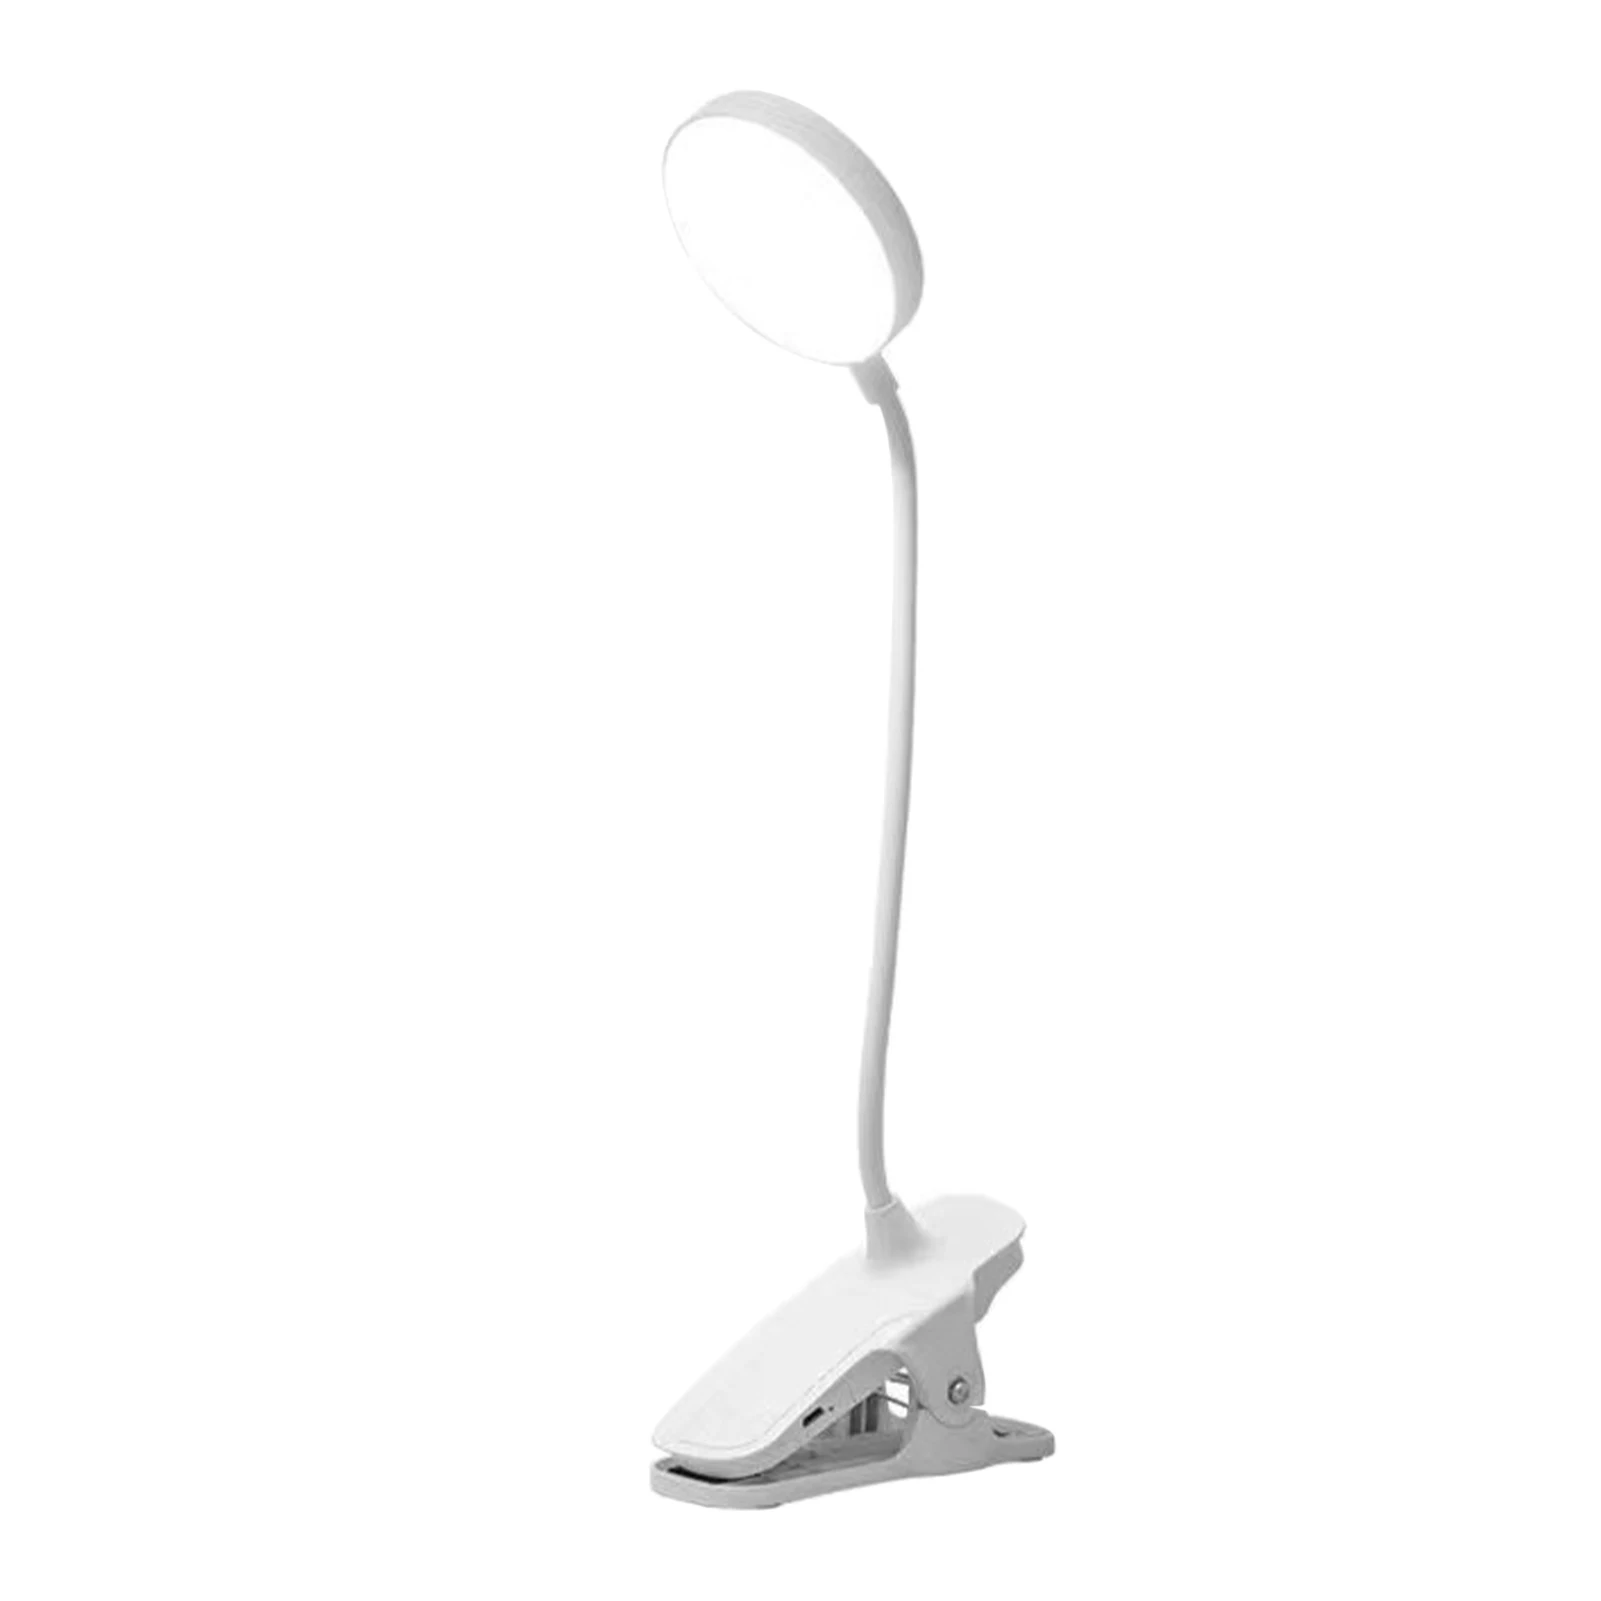 

Clip On 2 Lighting Modes Reading Flexible Gooseneck Bedroom Student LED Desk Lamp Dimming Touch Control Dormitory USB Powered